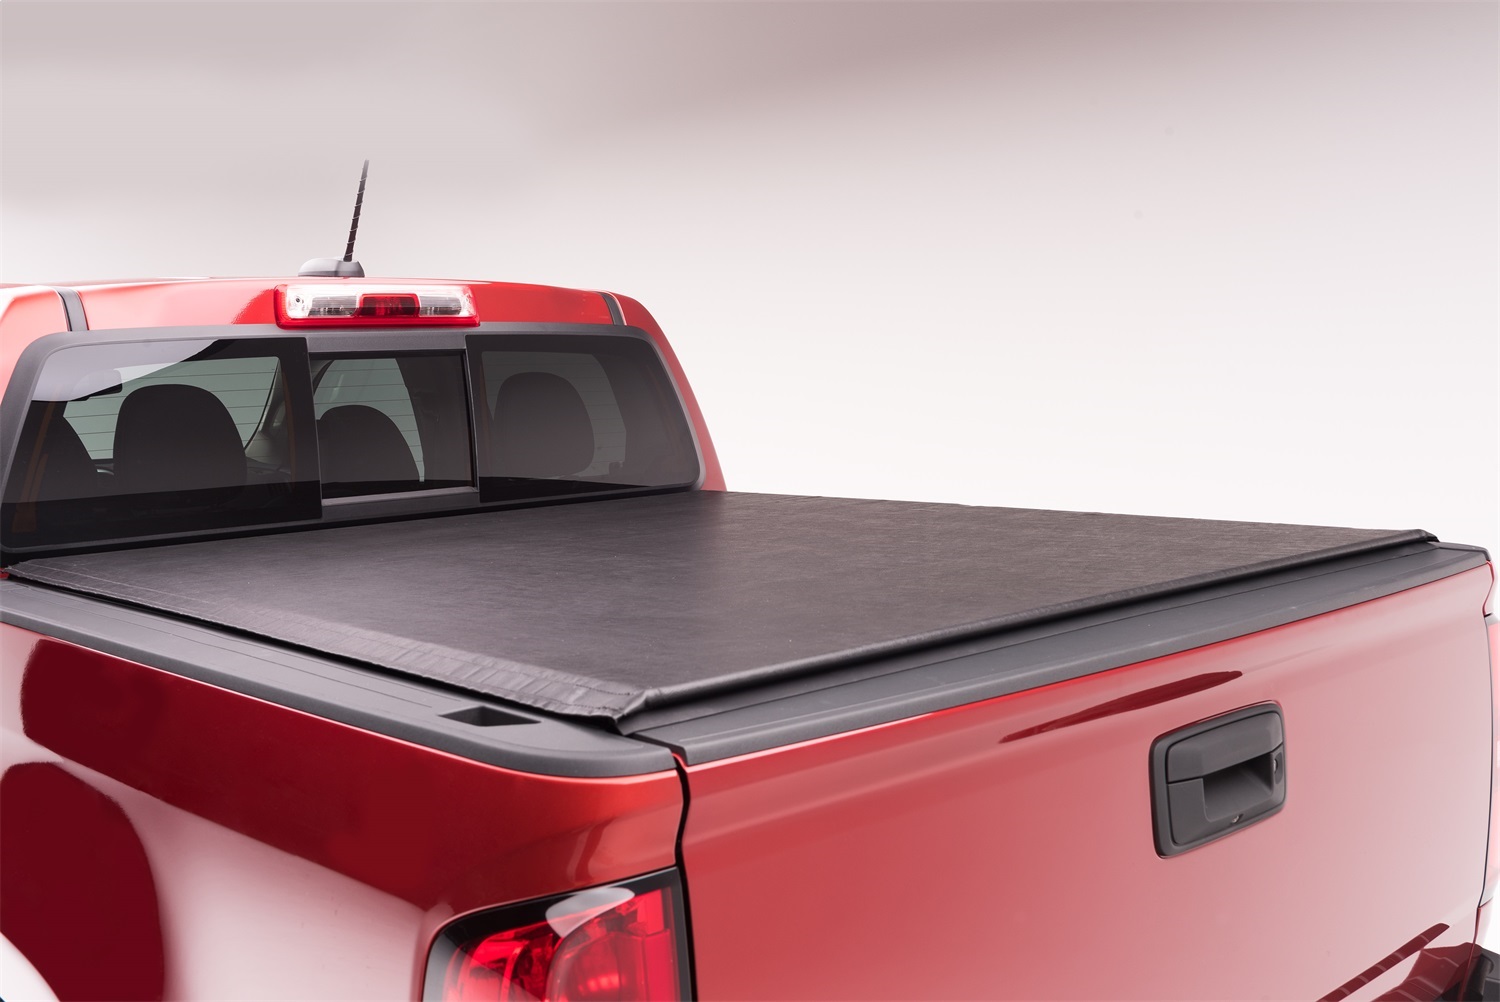 TruXedo Pro X15 Soft Roll Up Truck Bed Tonneau Cover